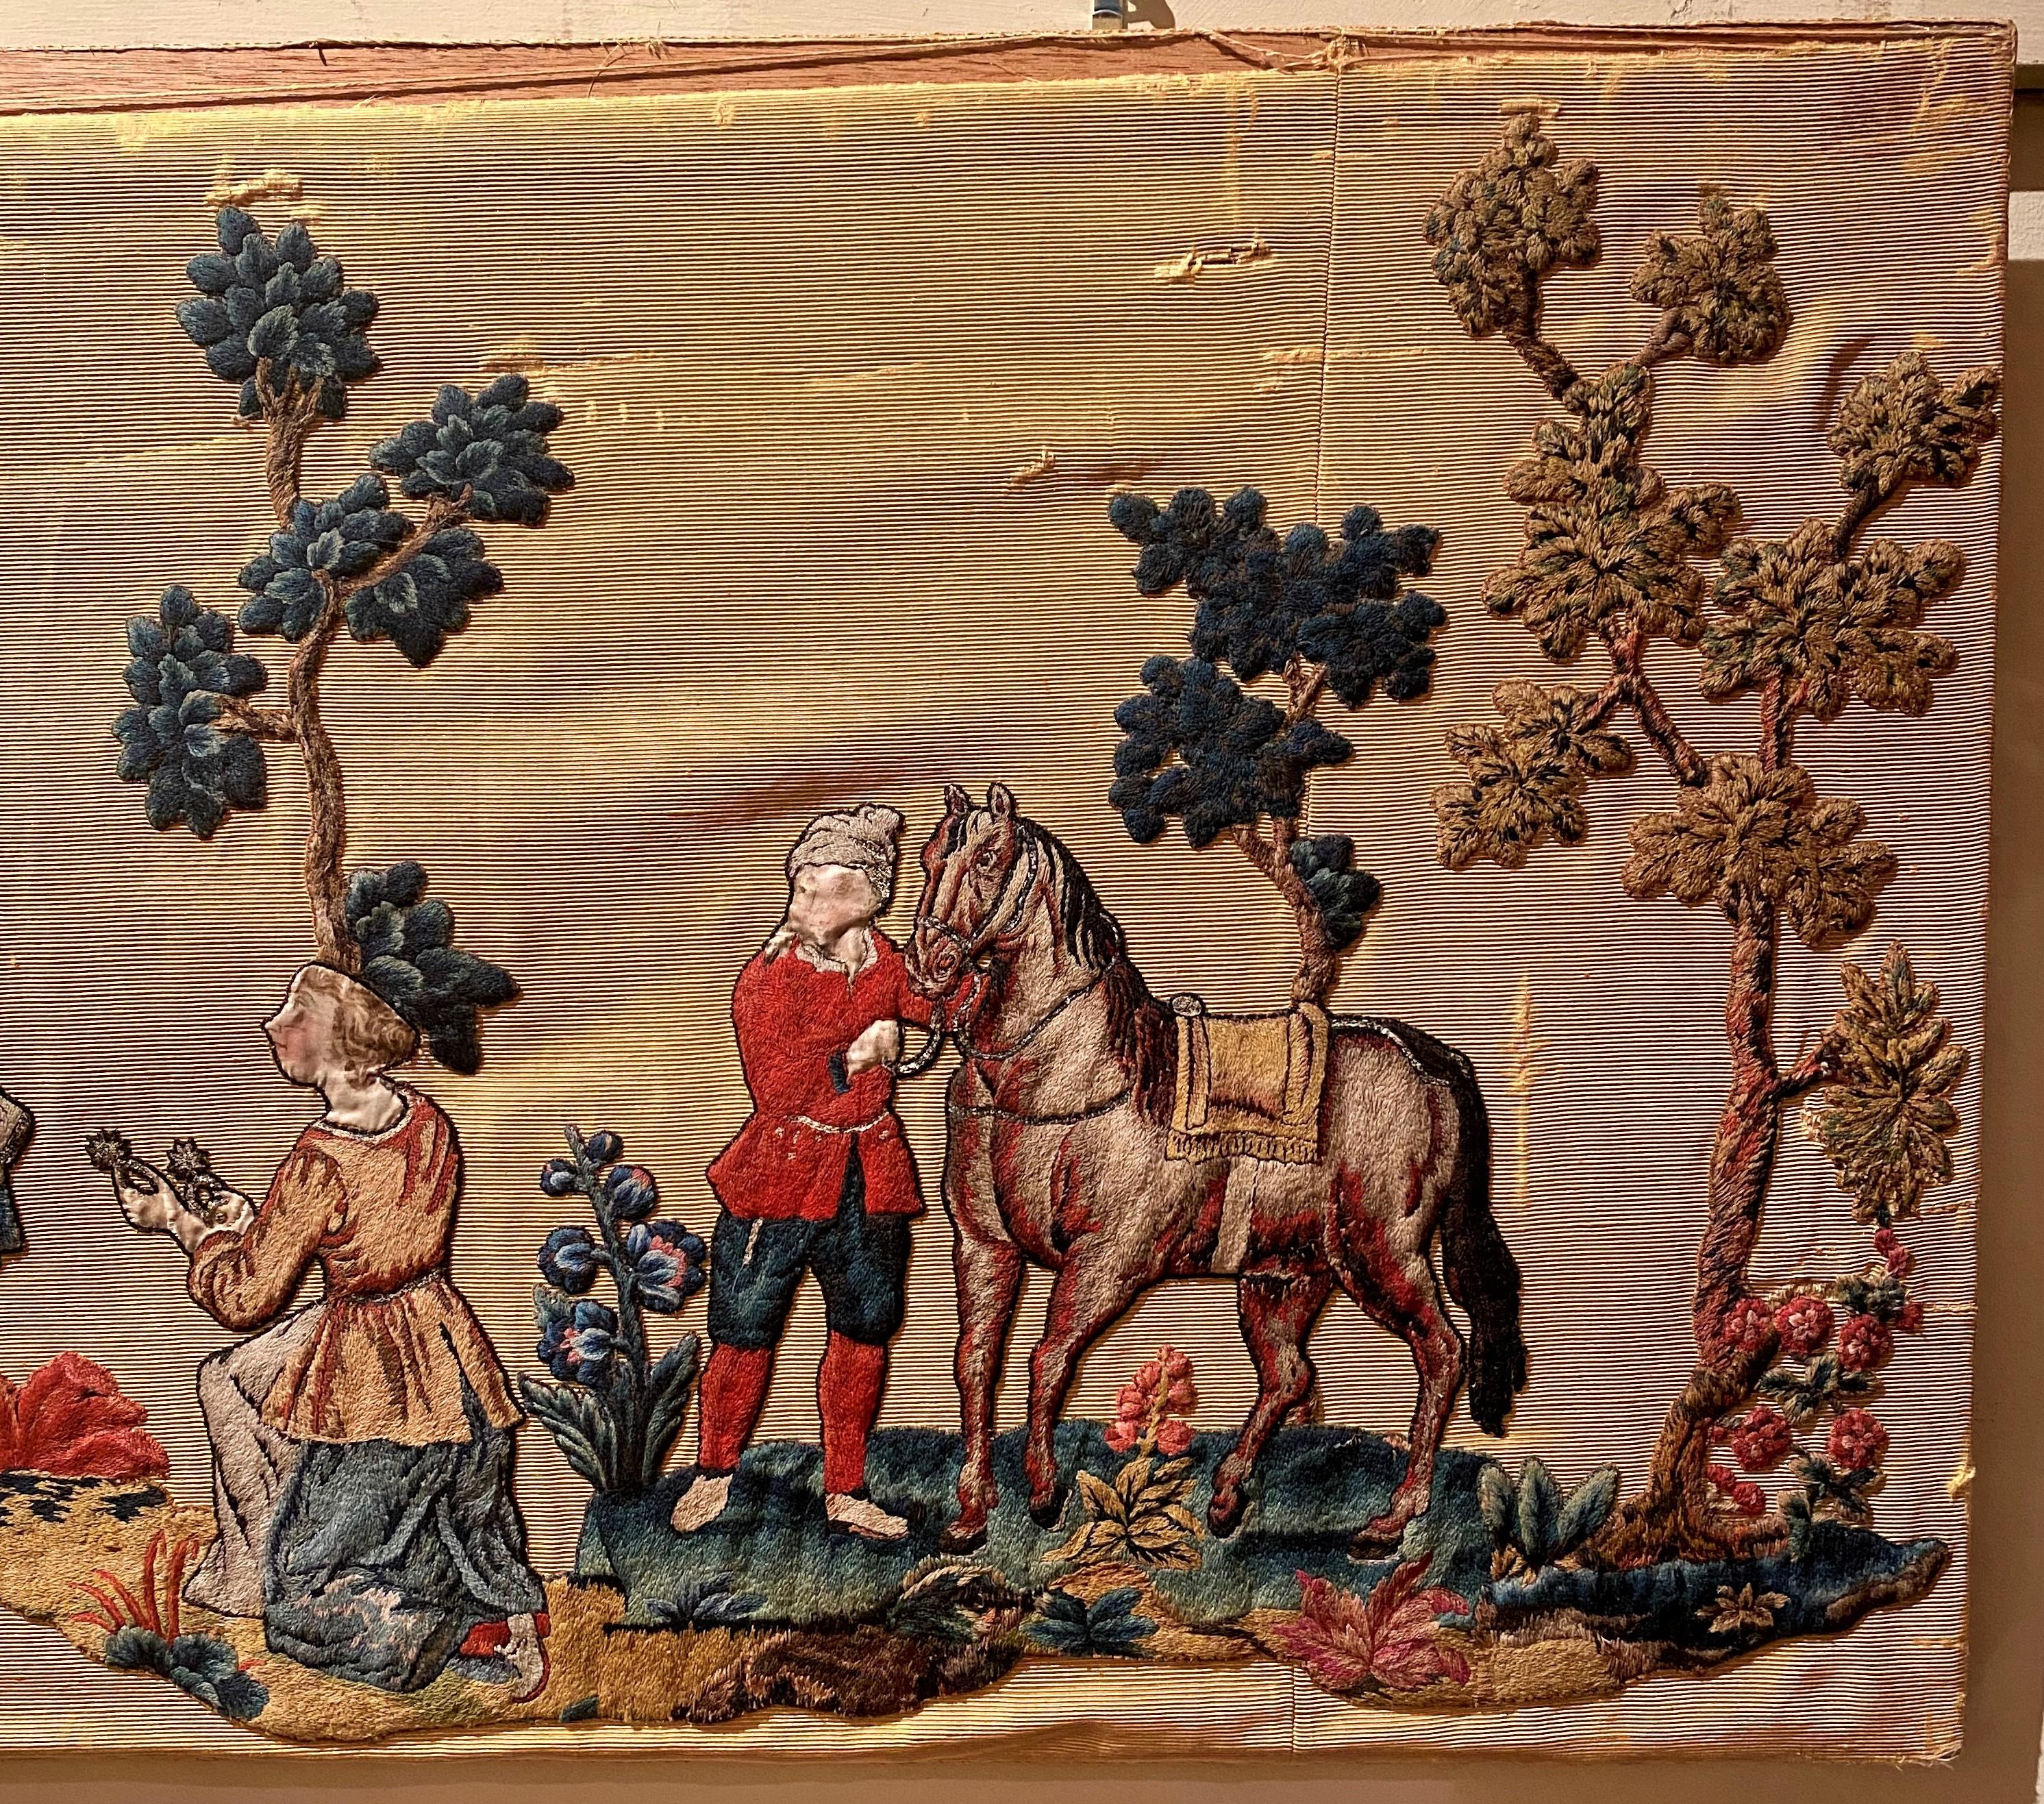 Unusual Antique 18th Century Flemish Needlework Tapestry In Fair Condition For Sale In New Orleans, LA